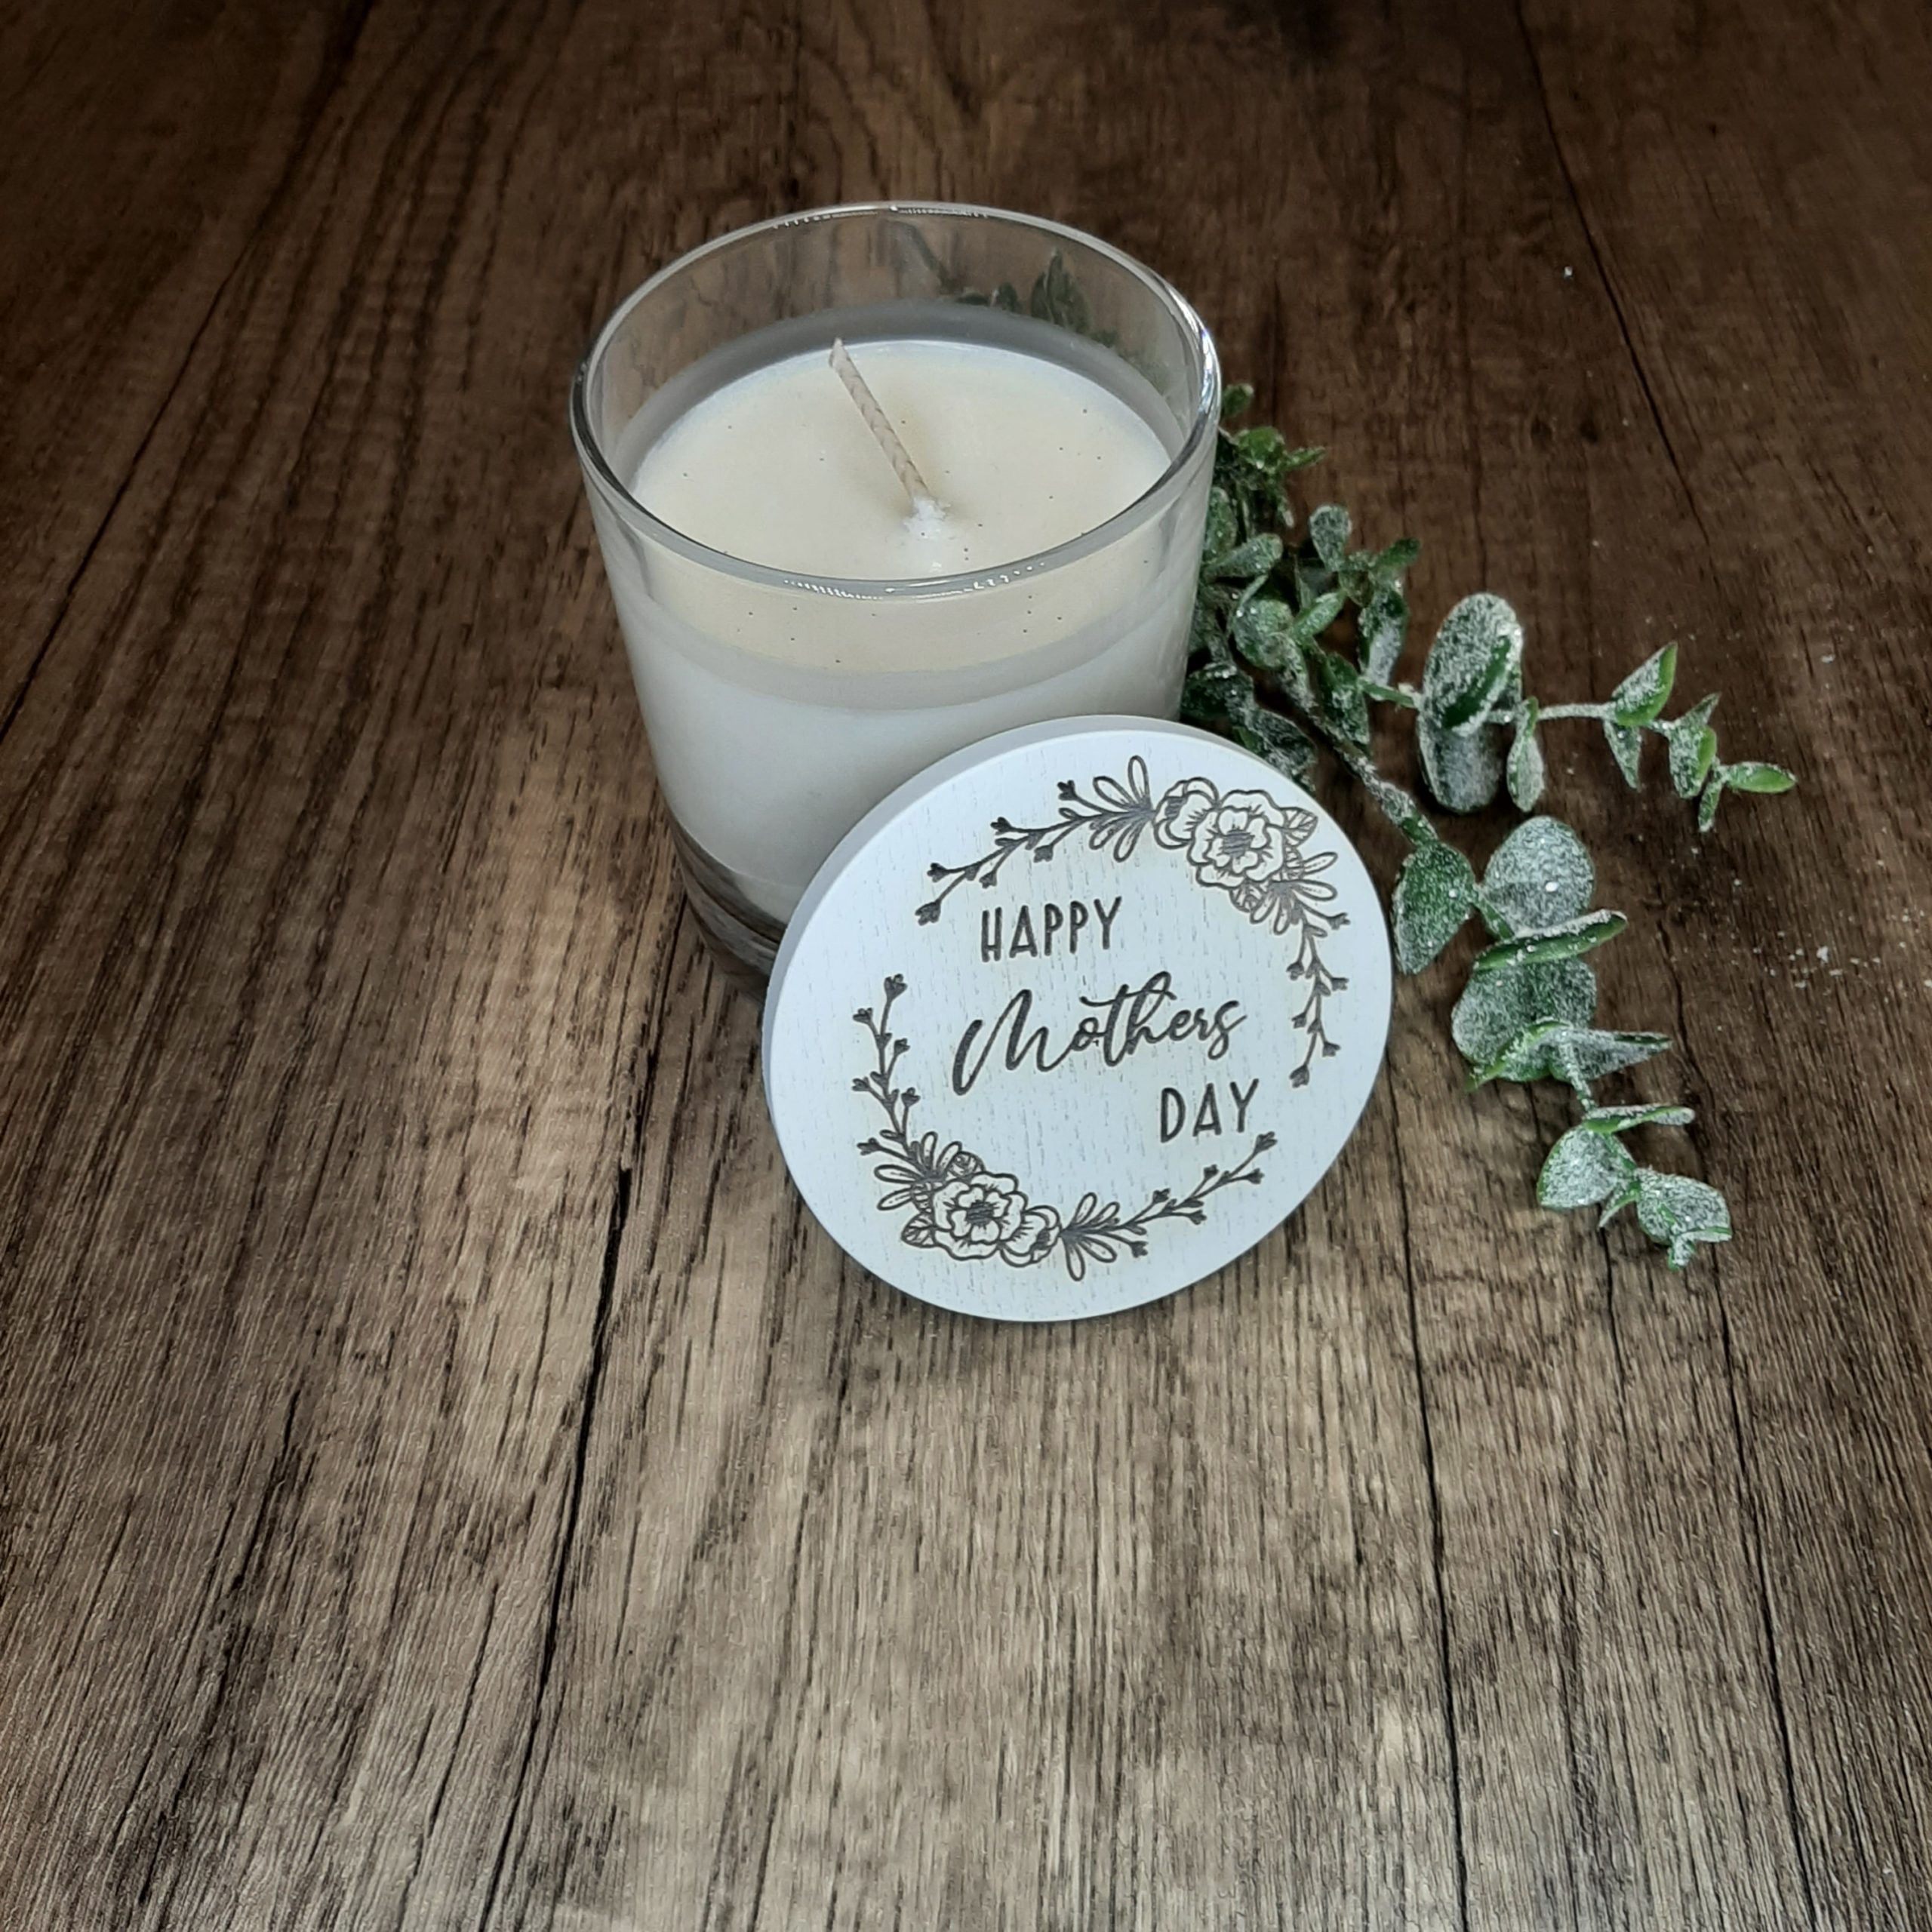 Glass Scented Personalised Candle, with lid off showing white scented wax, Personalised with engraved wreath for mother day